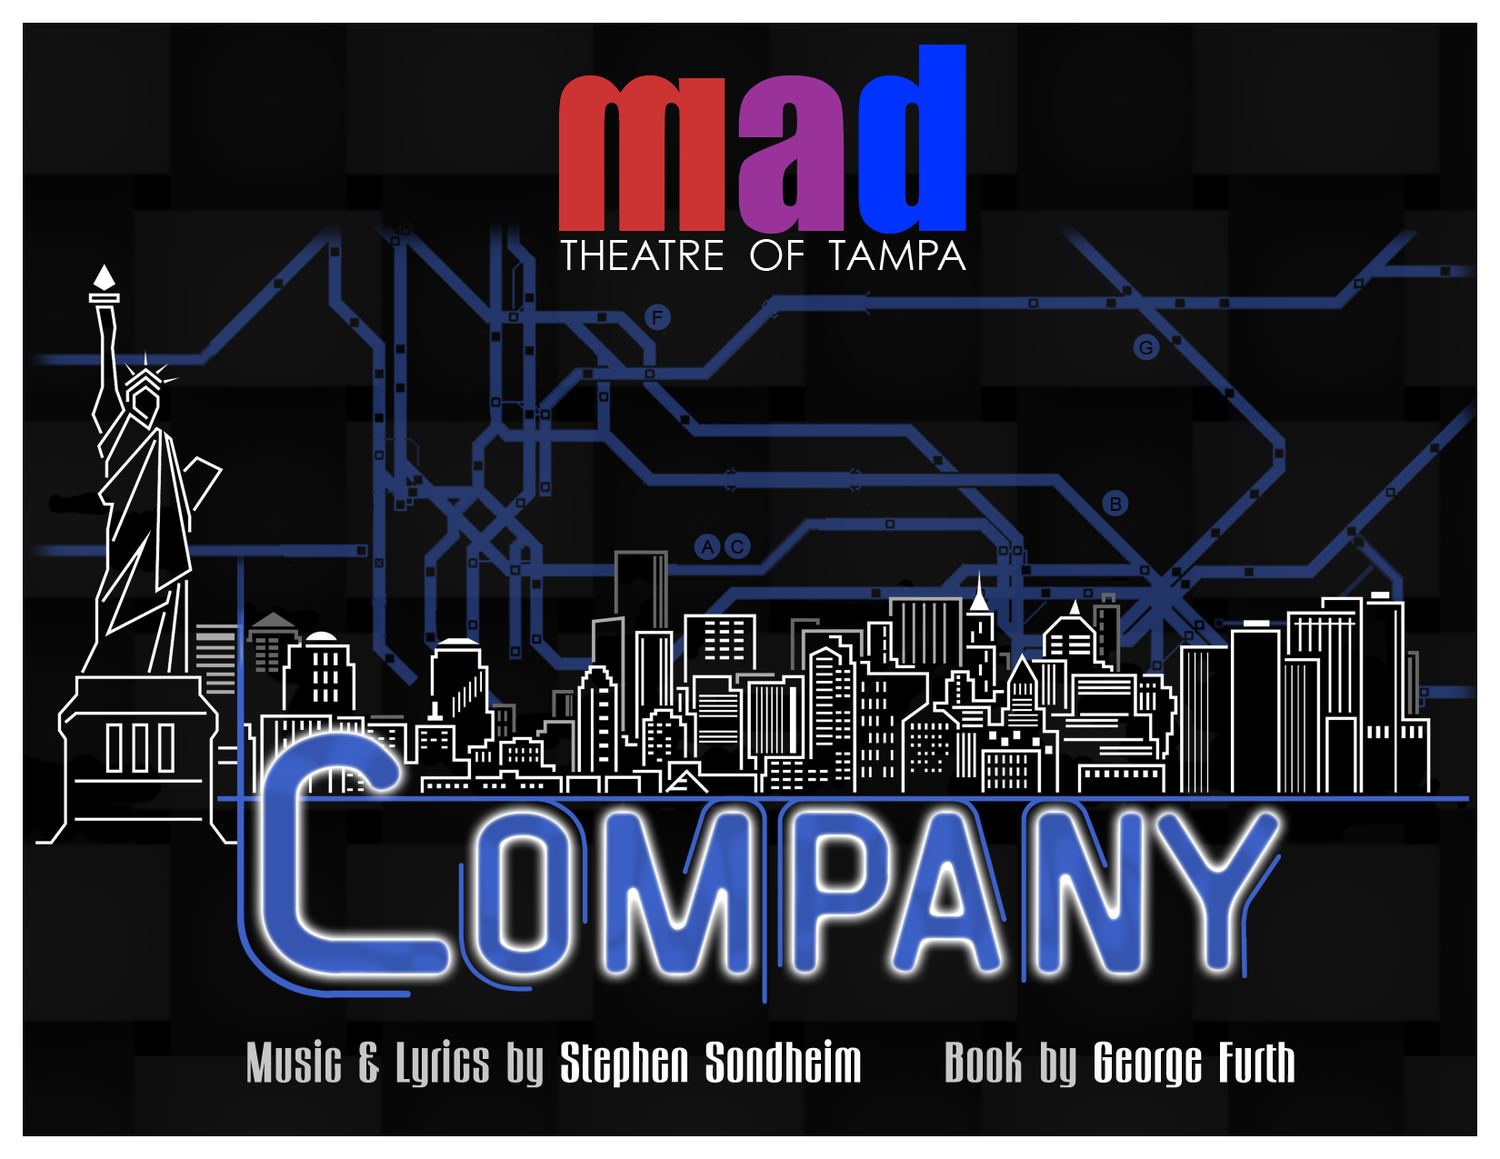 Ricky Marenda stars as Robert in mad Theatre of Tampa's Company 10